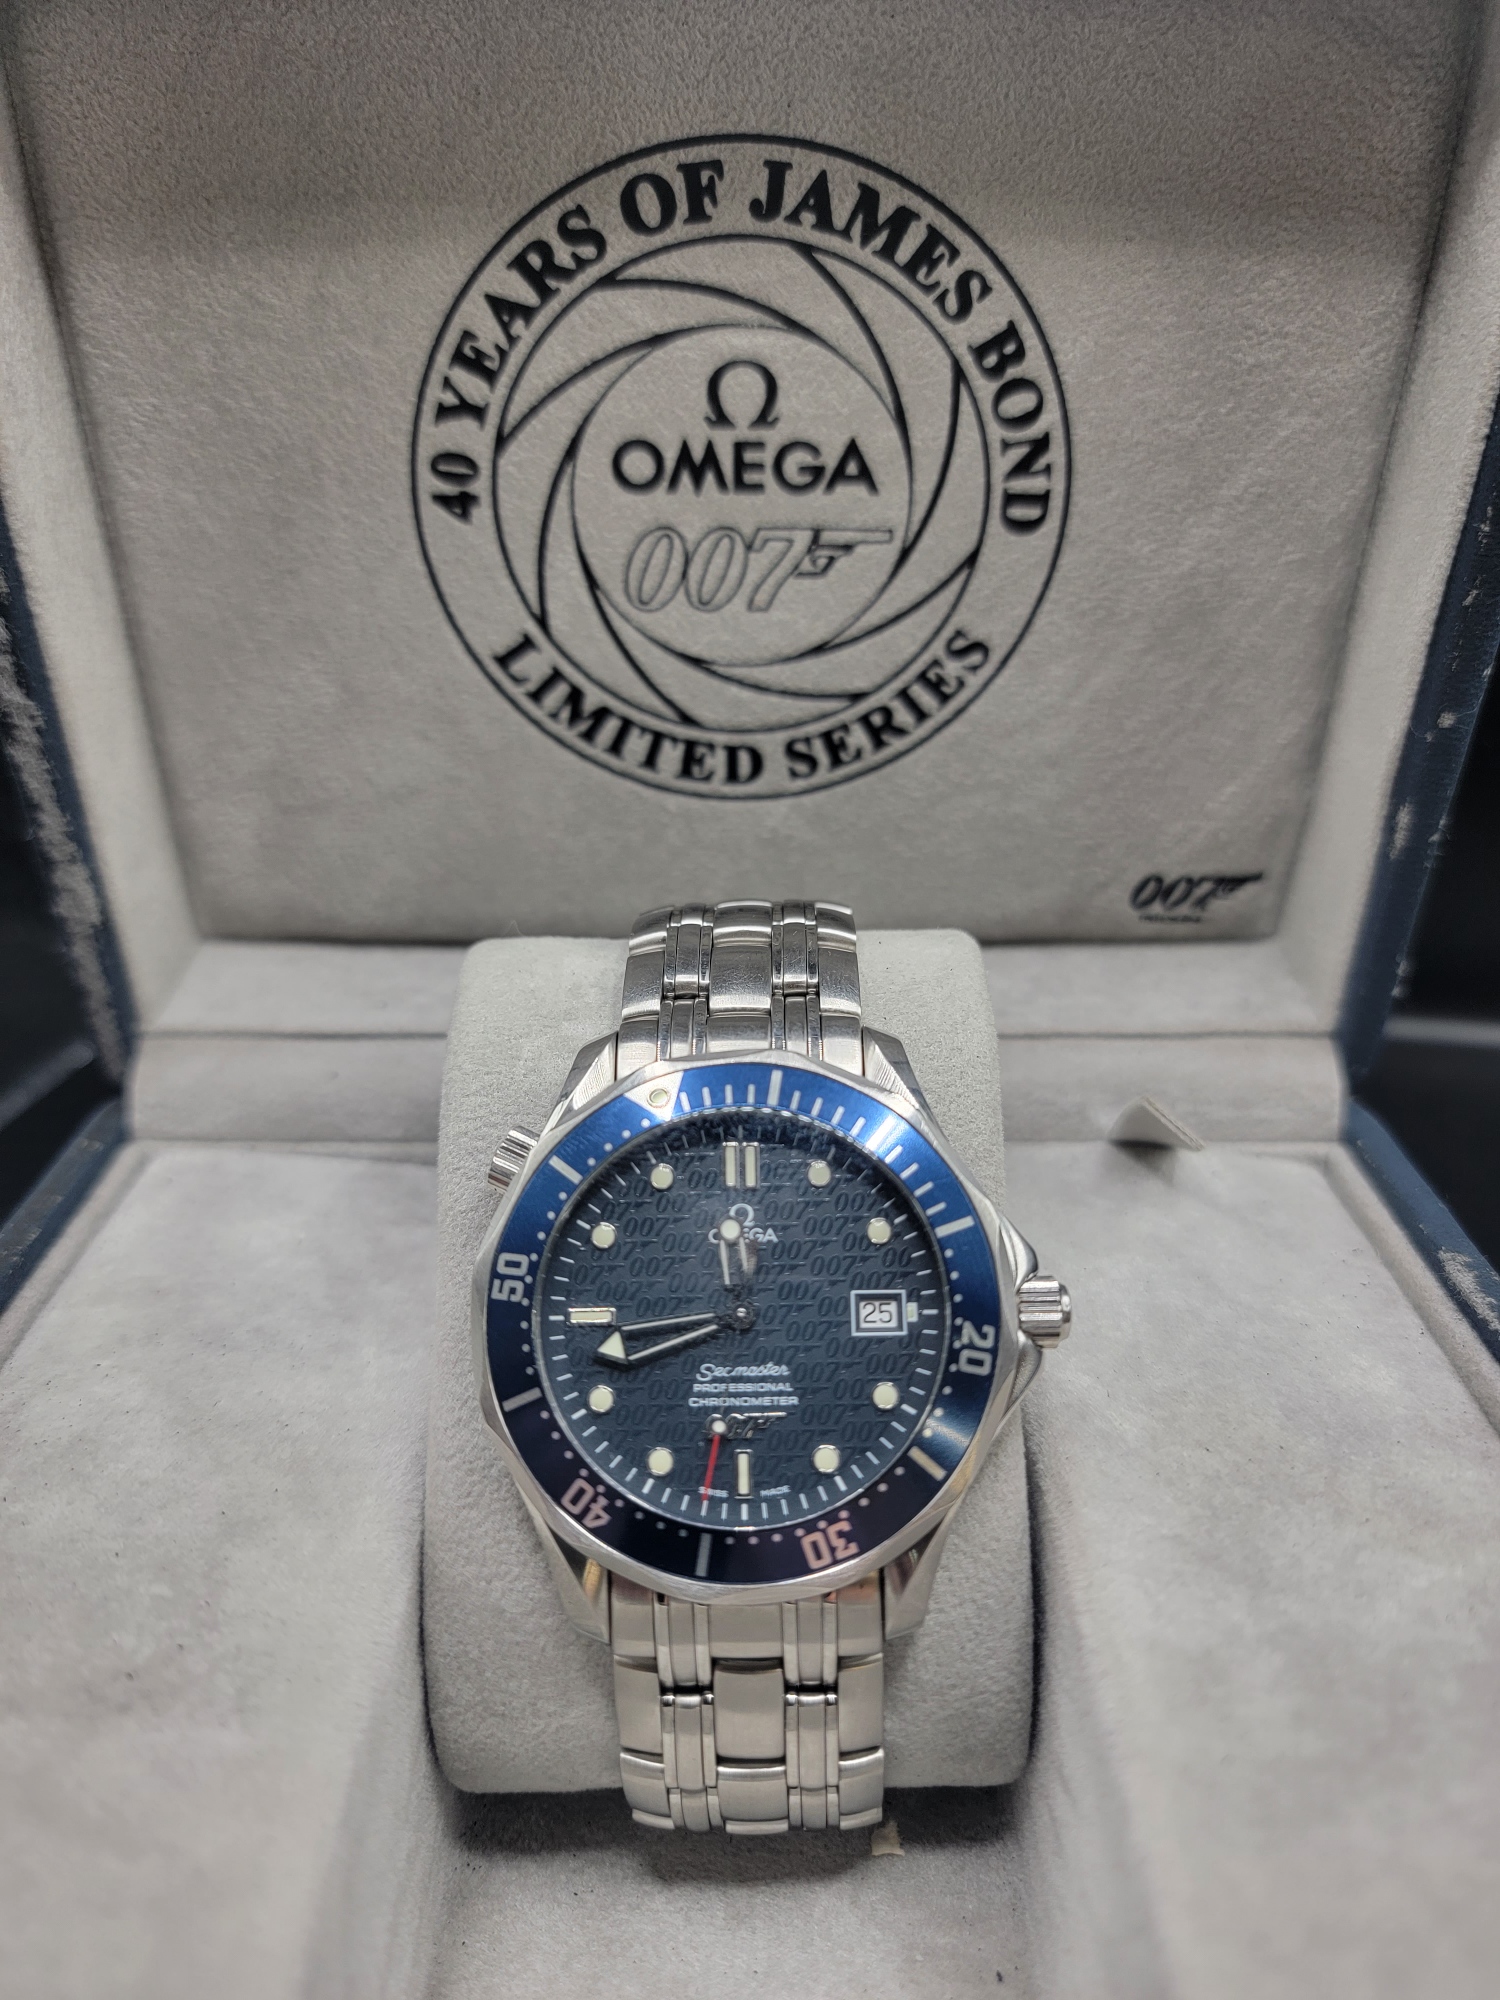 Omega Seamaster 007 40th Anniversary Limited Edition - Sol's Jewelry & Loan